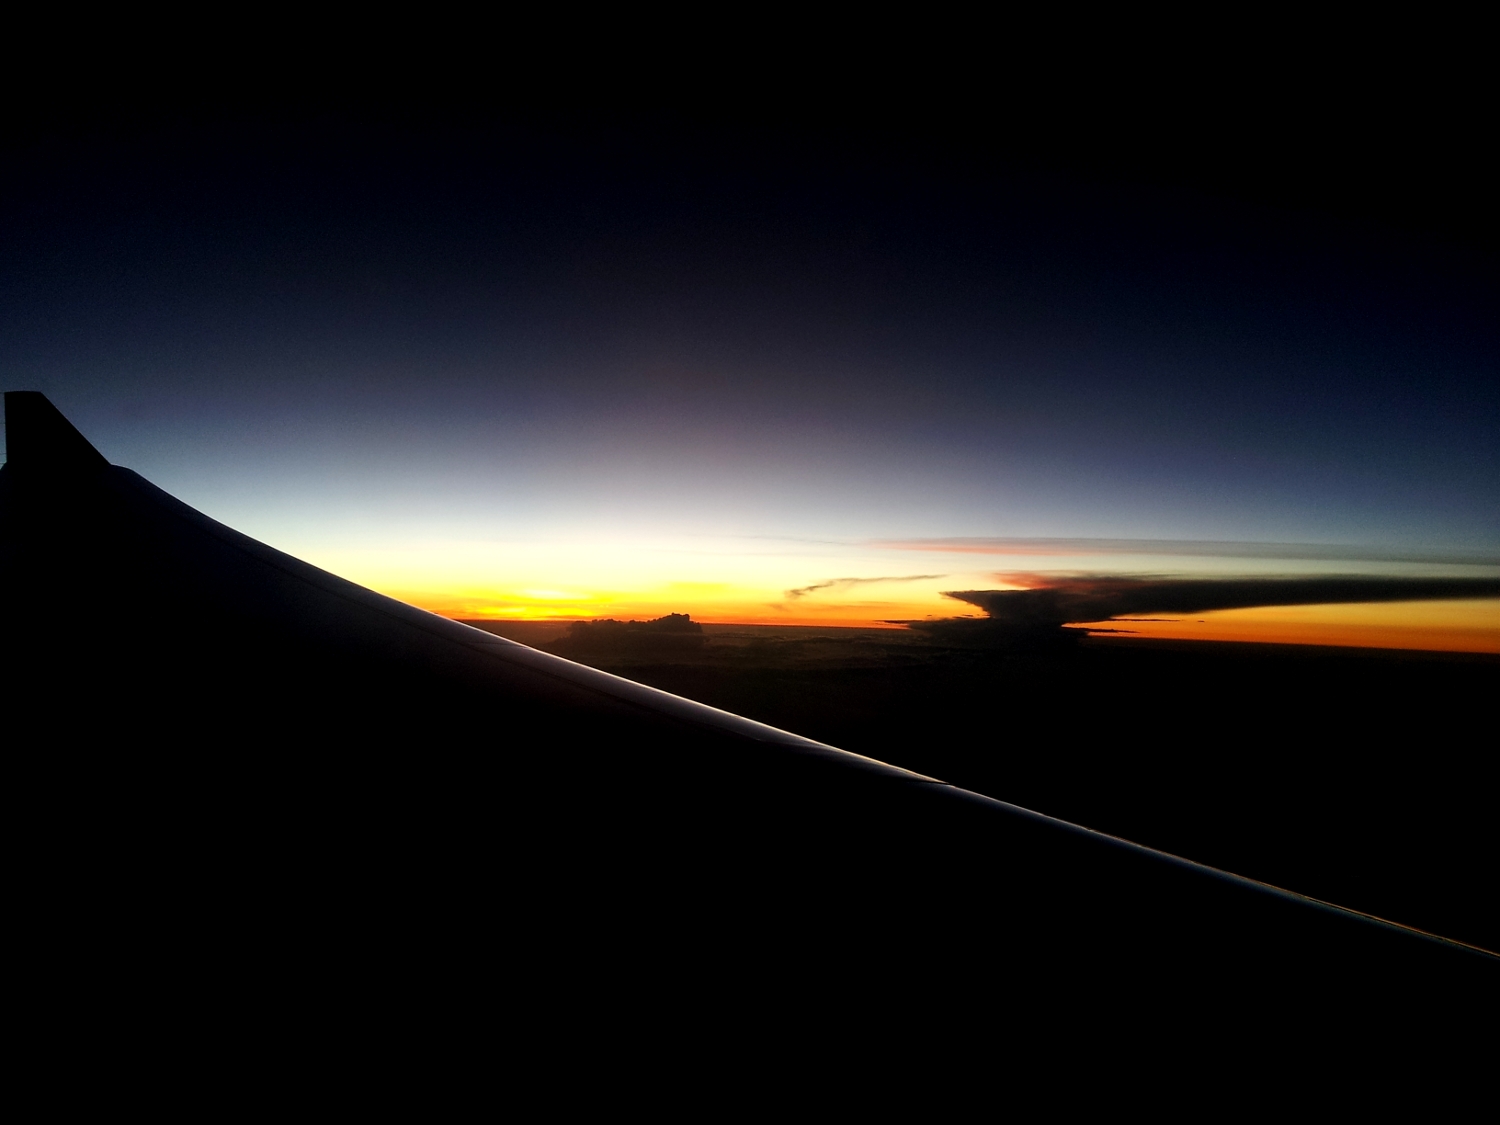 Sunrise seen from the airplane trip to  Johannesburg